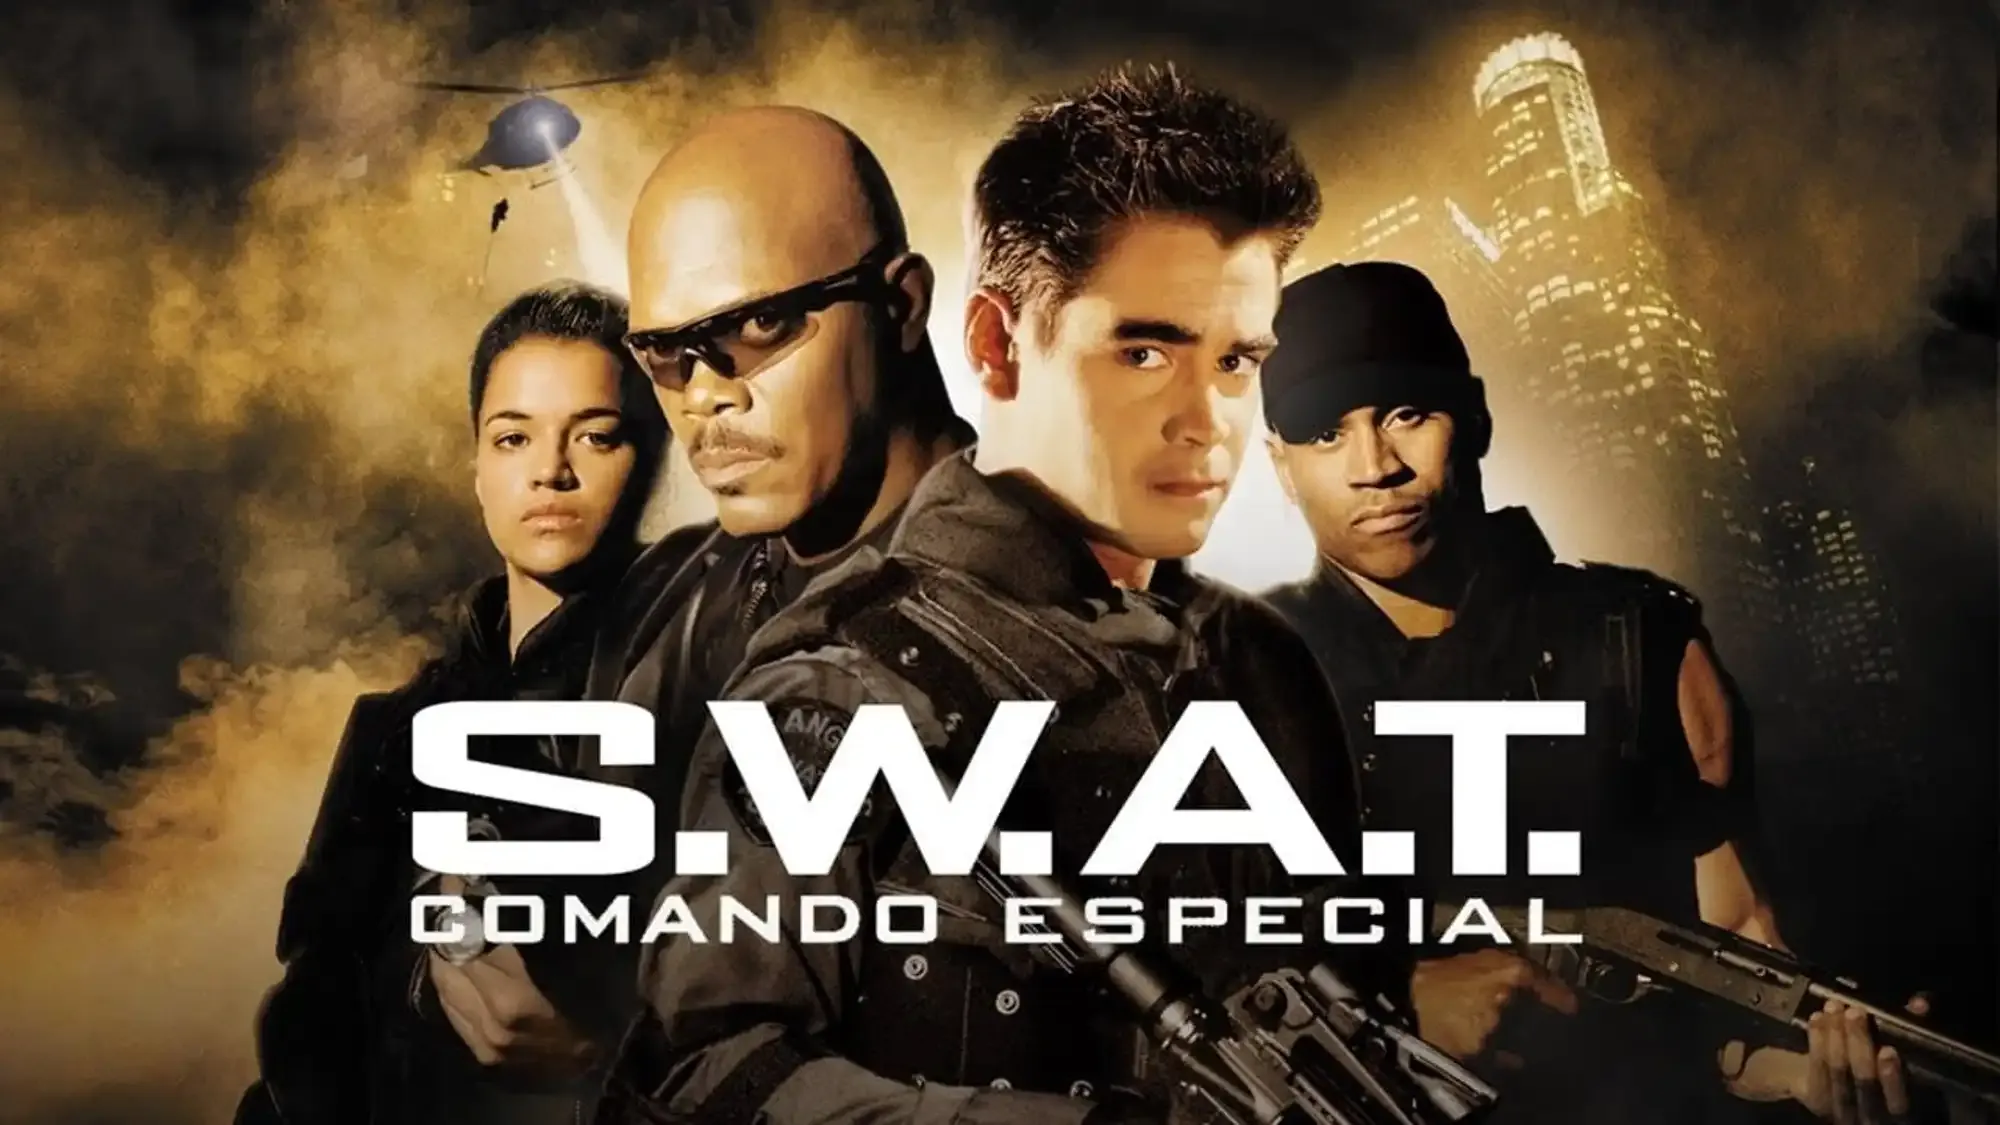 S.W.A.T. movie review